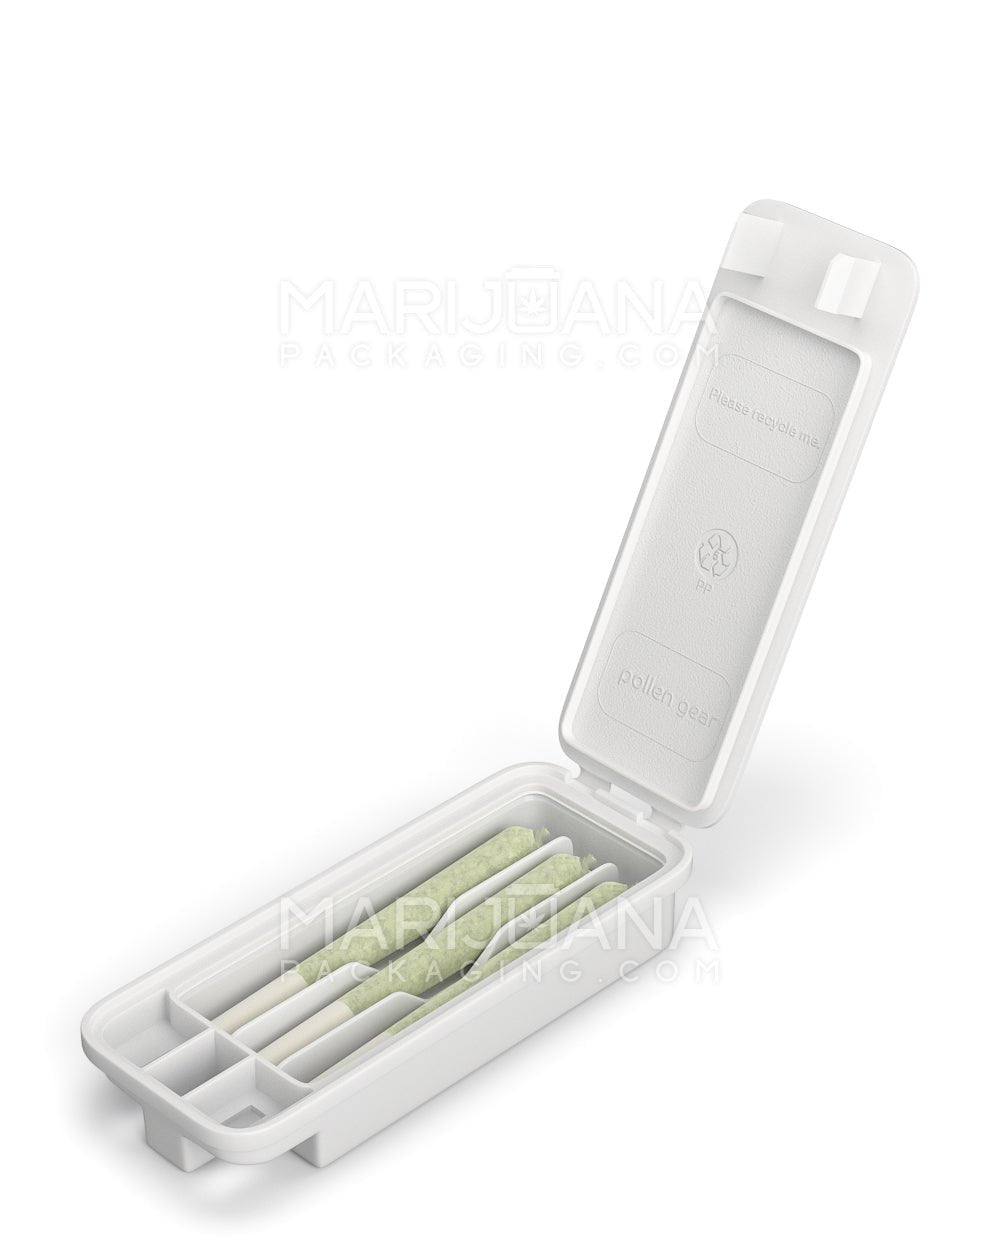 POLLEN GEAR | Snaptech Small White Plastic Tray | 25mm - Foam - 2500 Count - 7